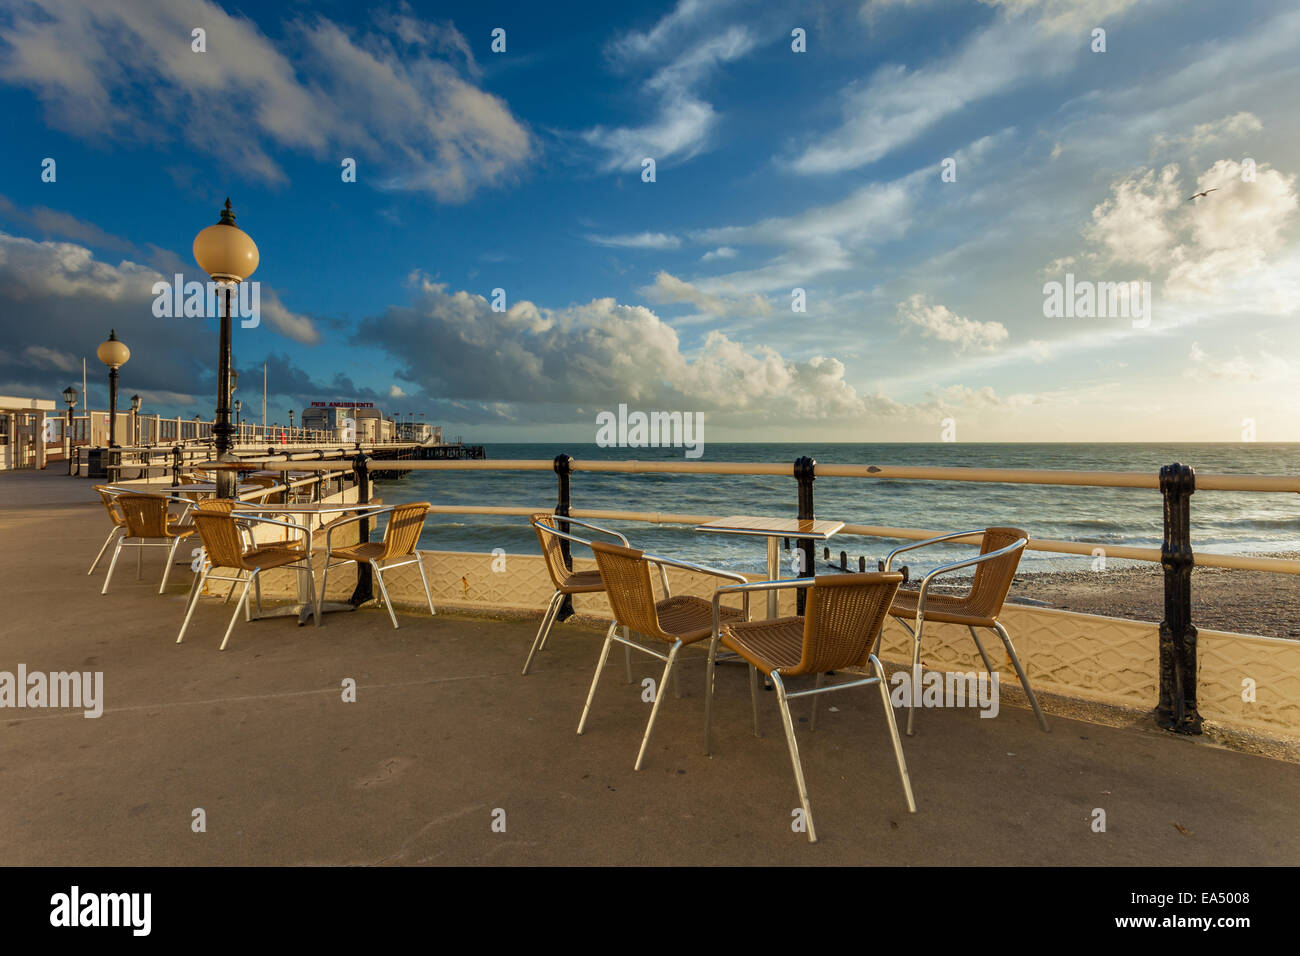 Afternoon at the Worthing Pier, West Sussex, England. Stock Photo